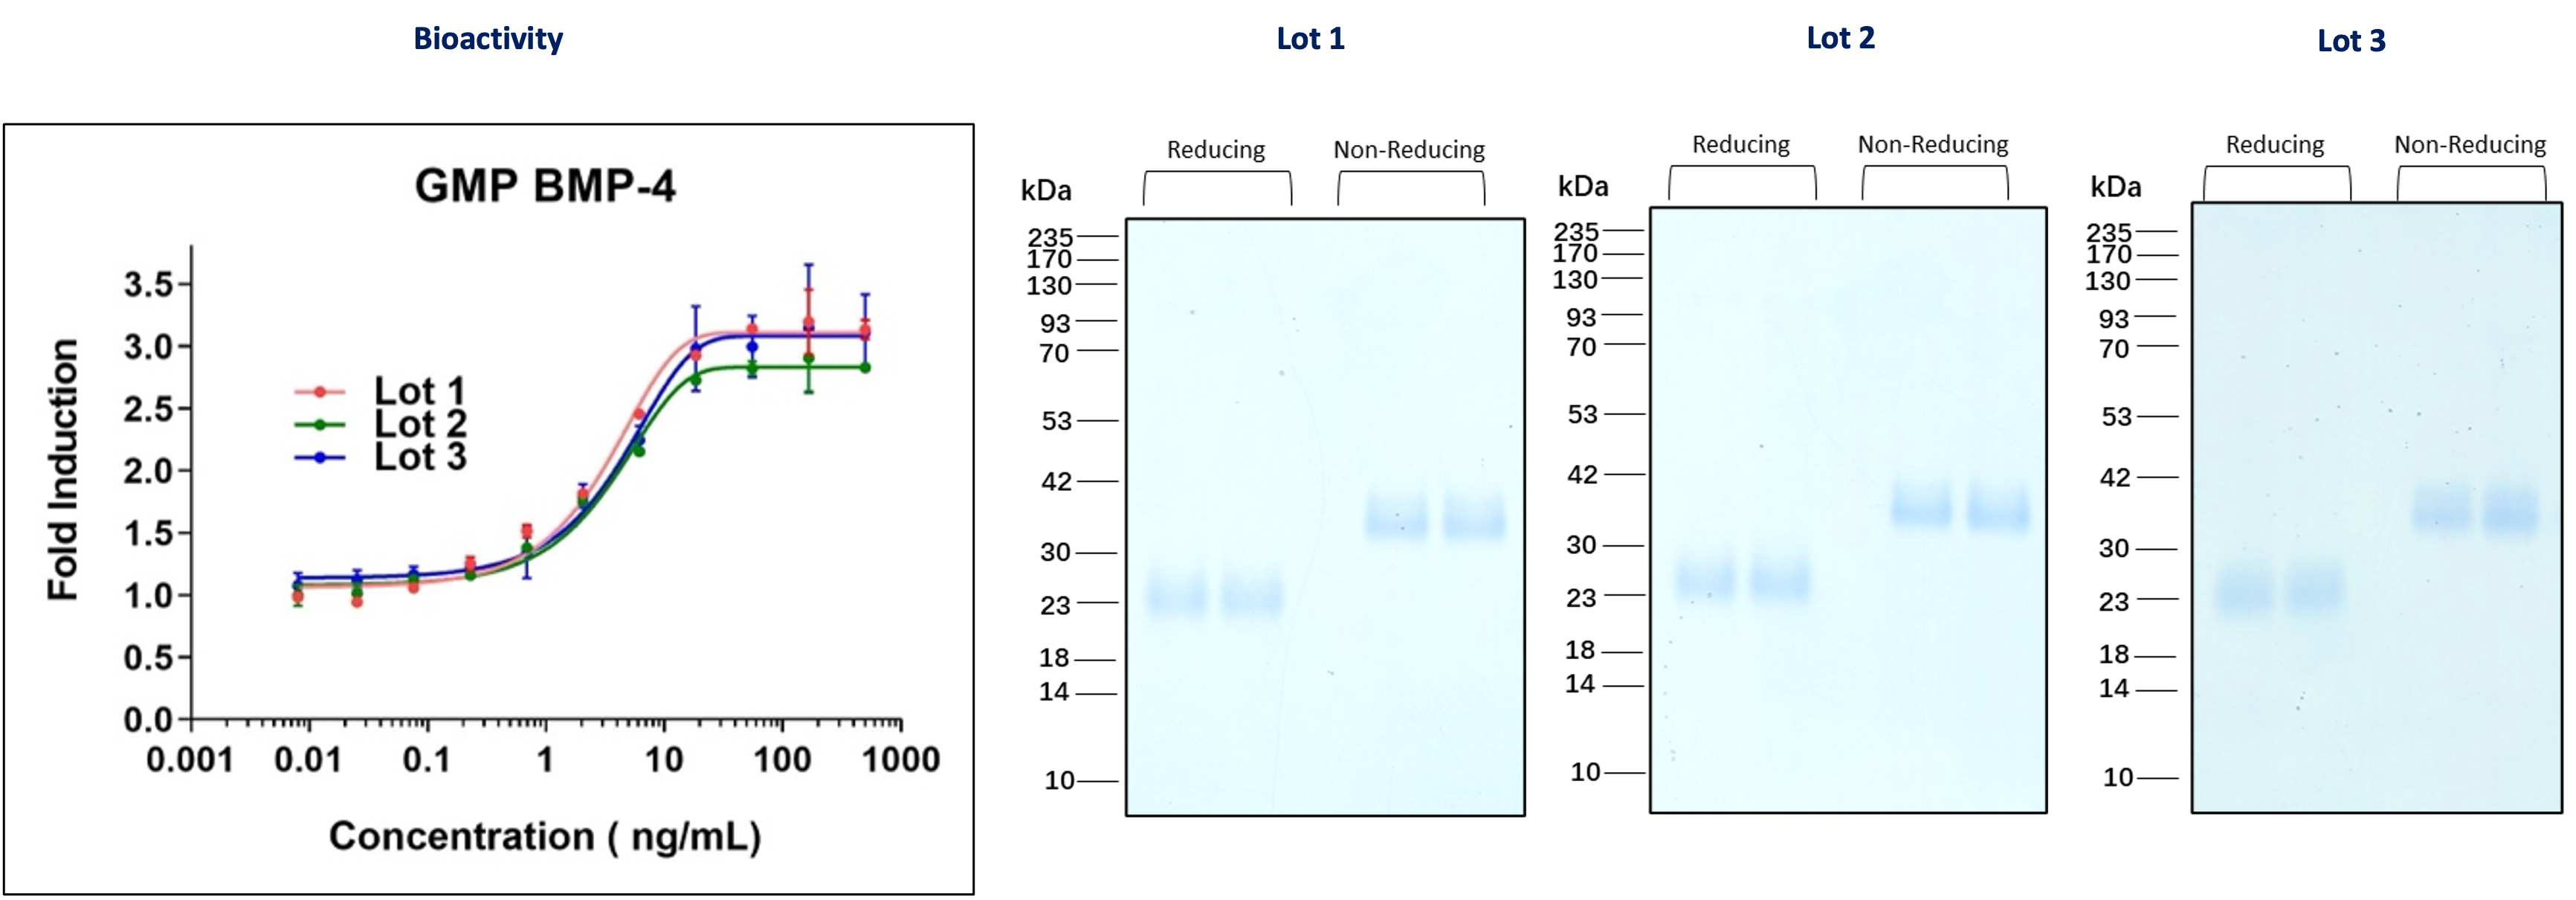 Three independent lots of GMP BMP-4 were tested for their ability to induce alkaline phosphatase production in ATDC5 (mouse chondrogenic) cells